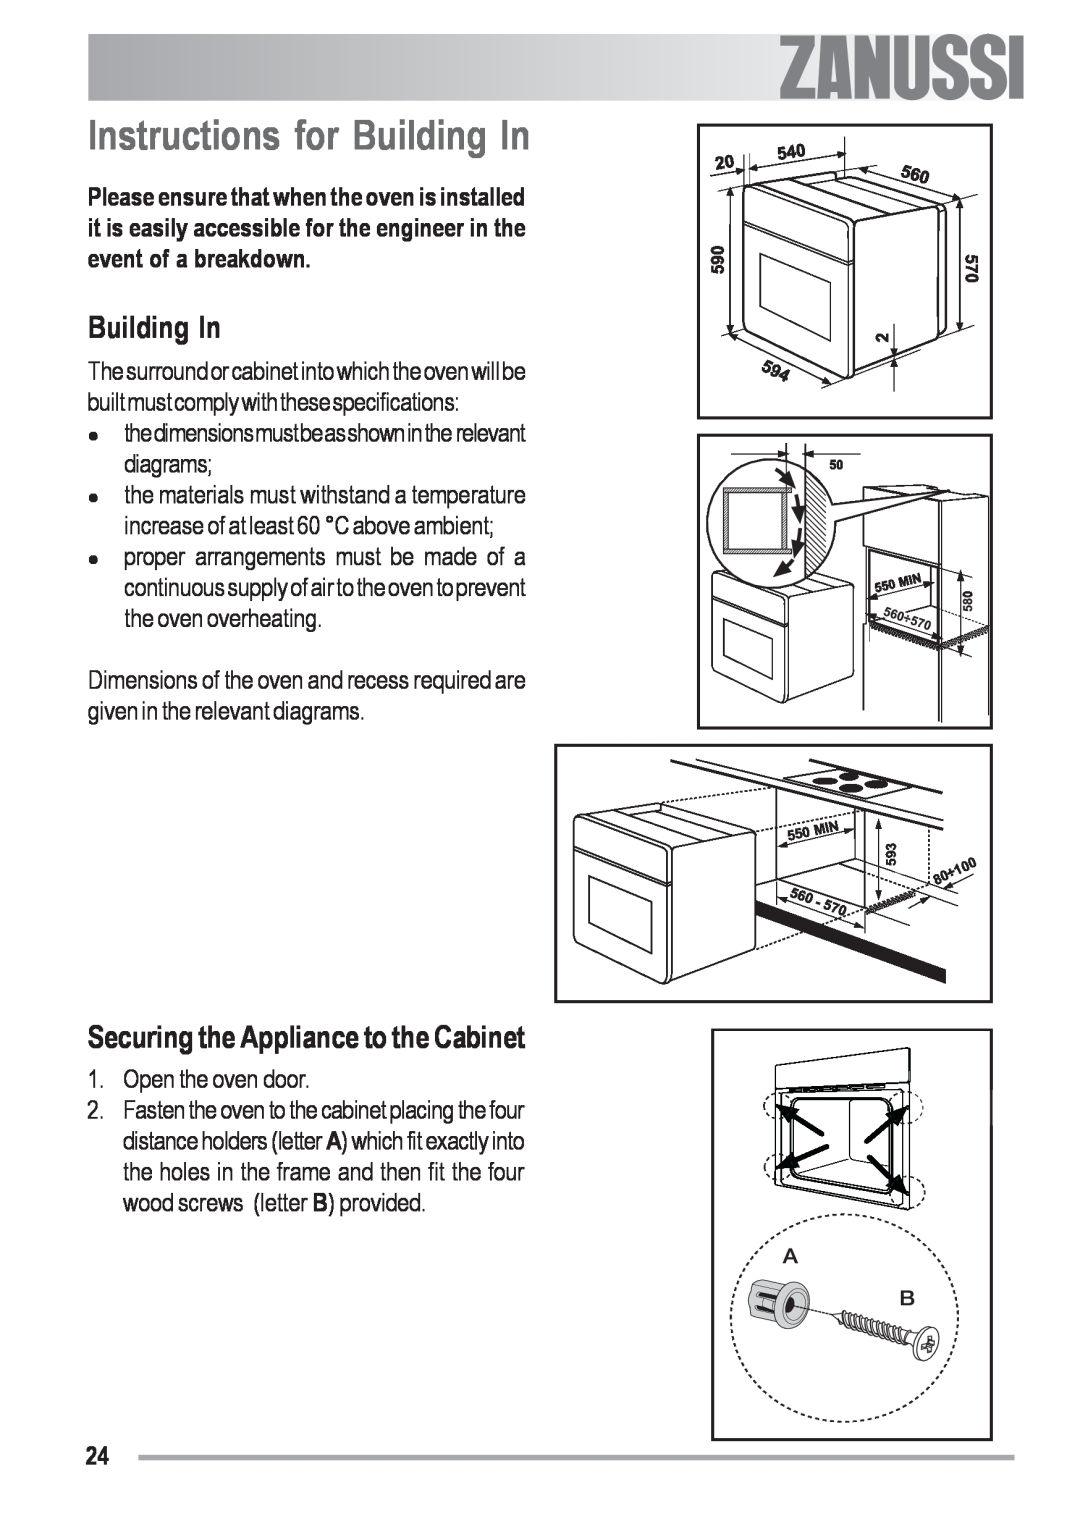 Zanussi ZOB 330 Instructions for Building In, z thedimensionsmustbeasshowninthe relevant diagrams, Open the oven door 